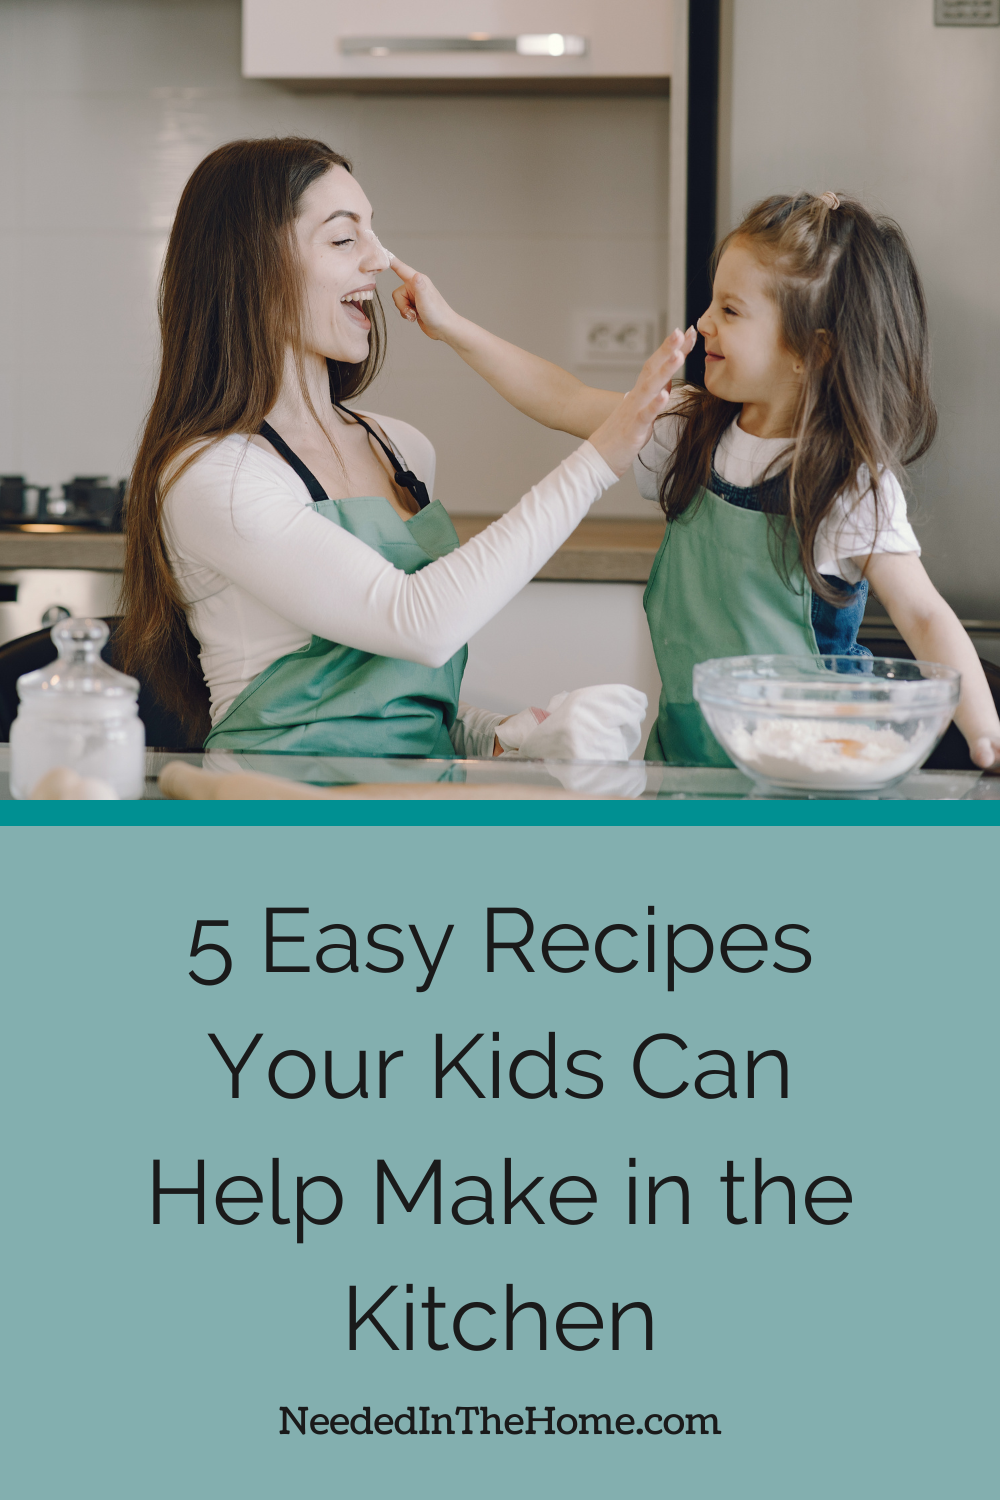 pinterest pin description 5 easy recipes your kids can help make in the kitchen mom and daughter touching each other's noses with flour on their fingers from baking bowl neededinthehome